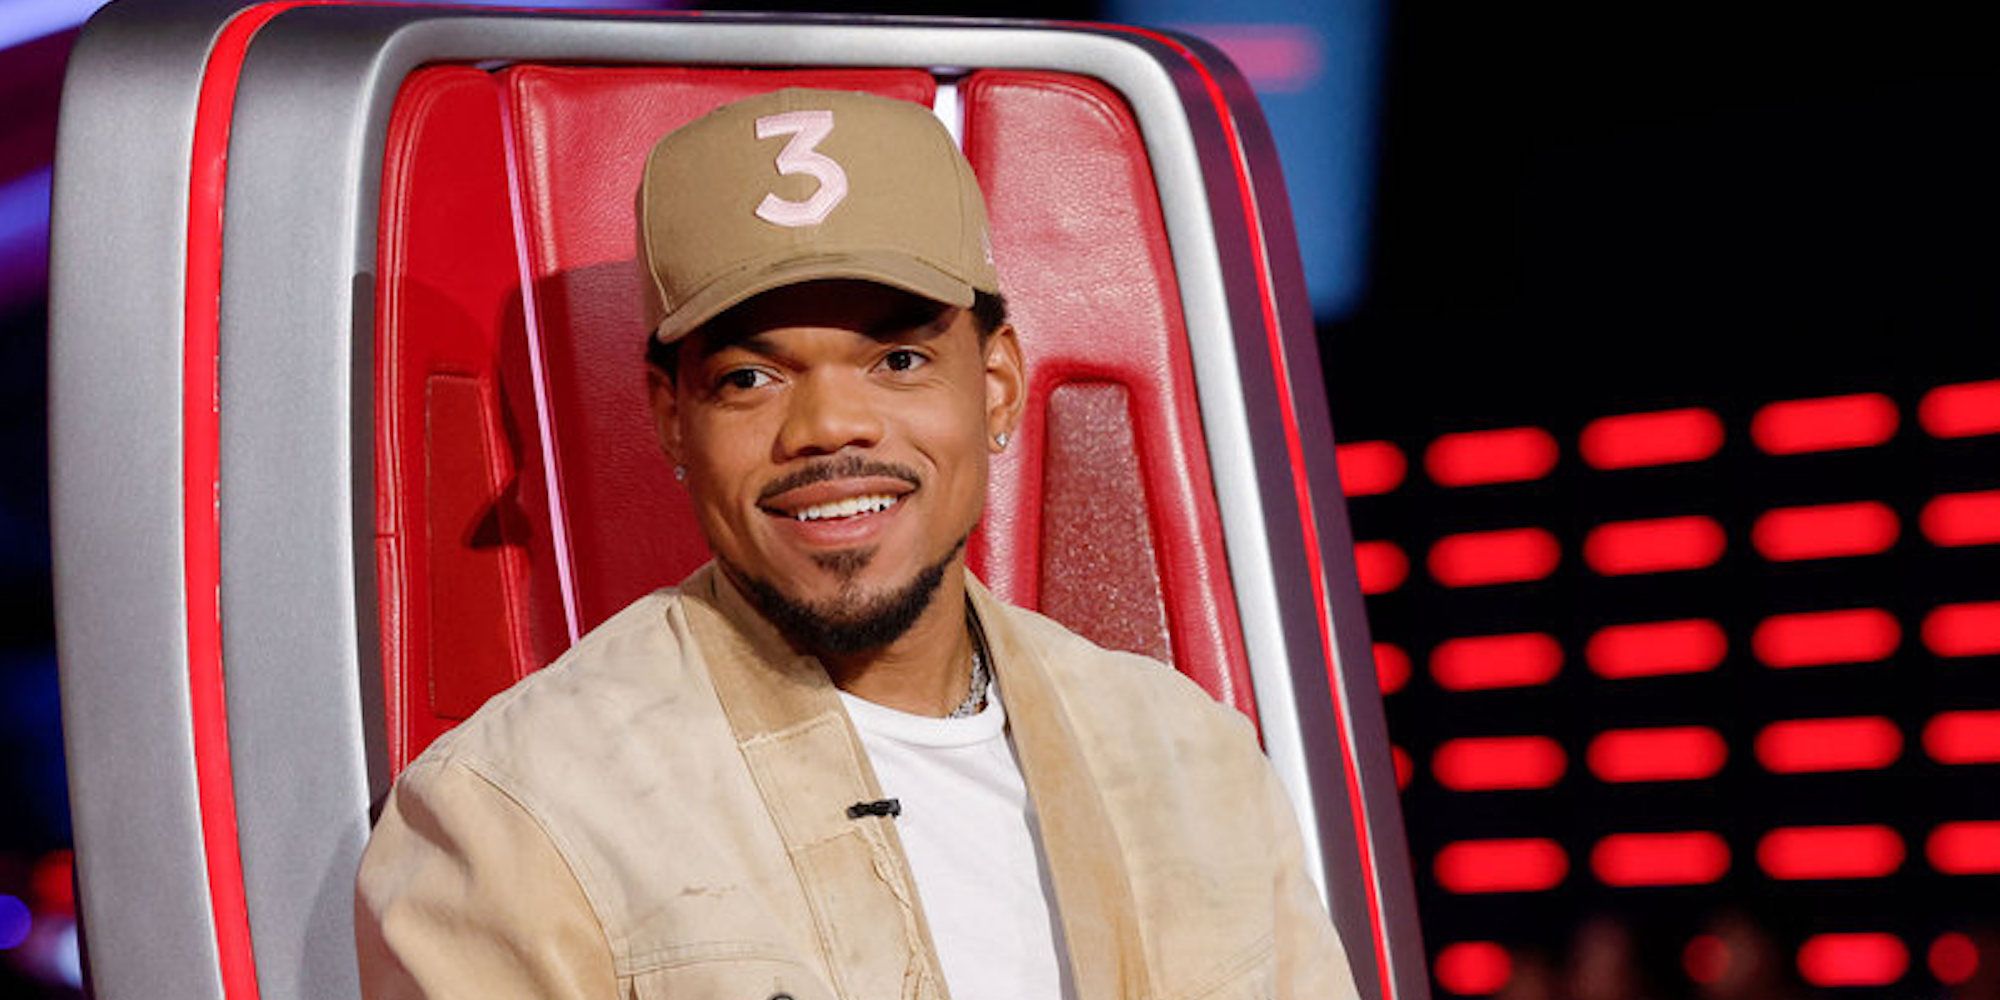 Chance the Rapper looks toward the camera smiling while seated in his chair on 'The Voice'